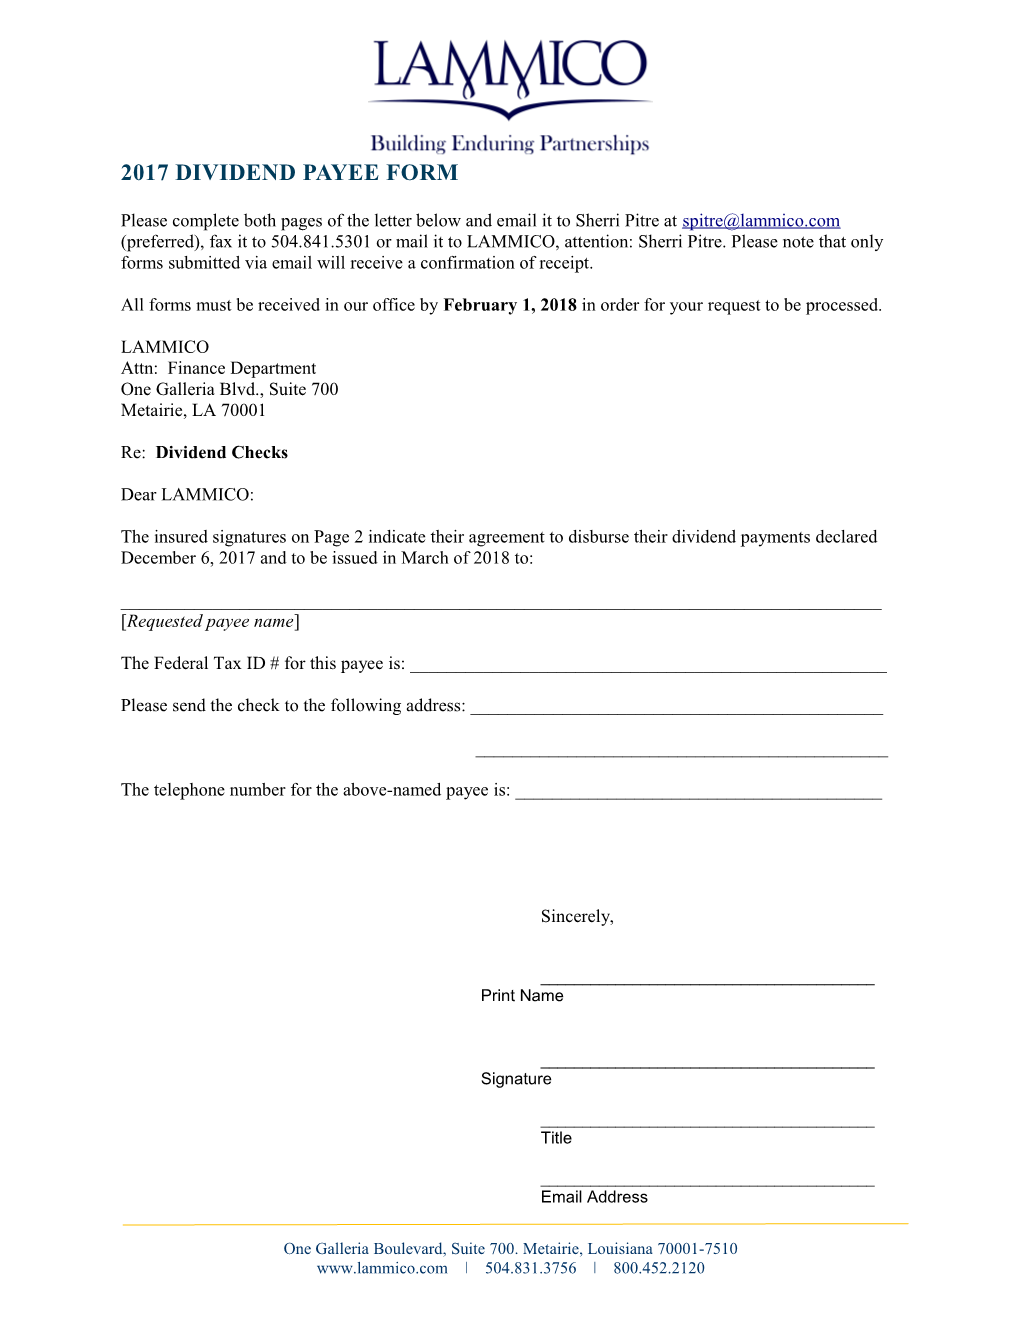 2017 Dividend Payee Form